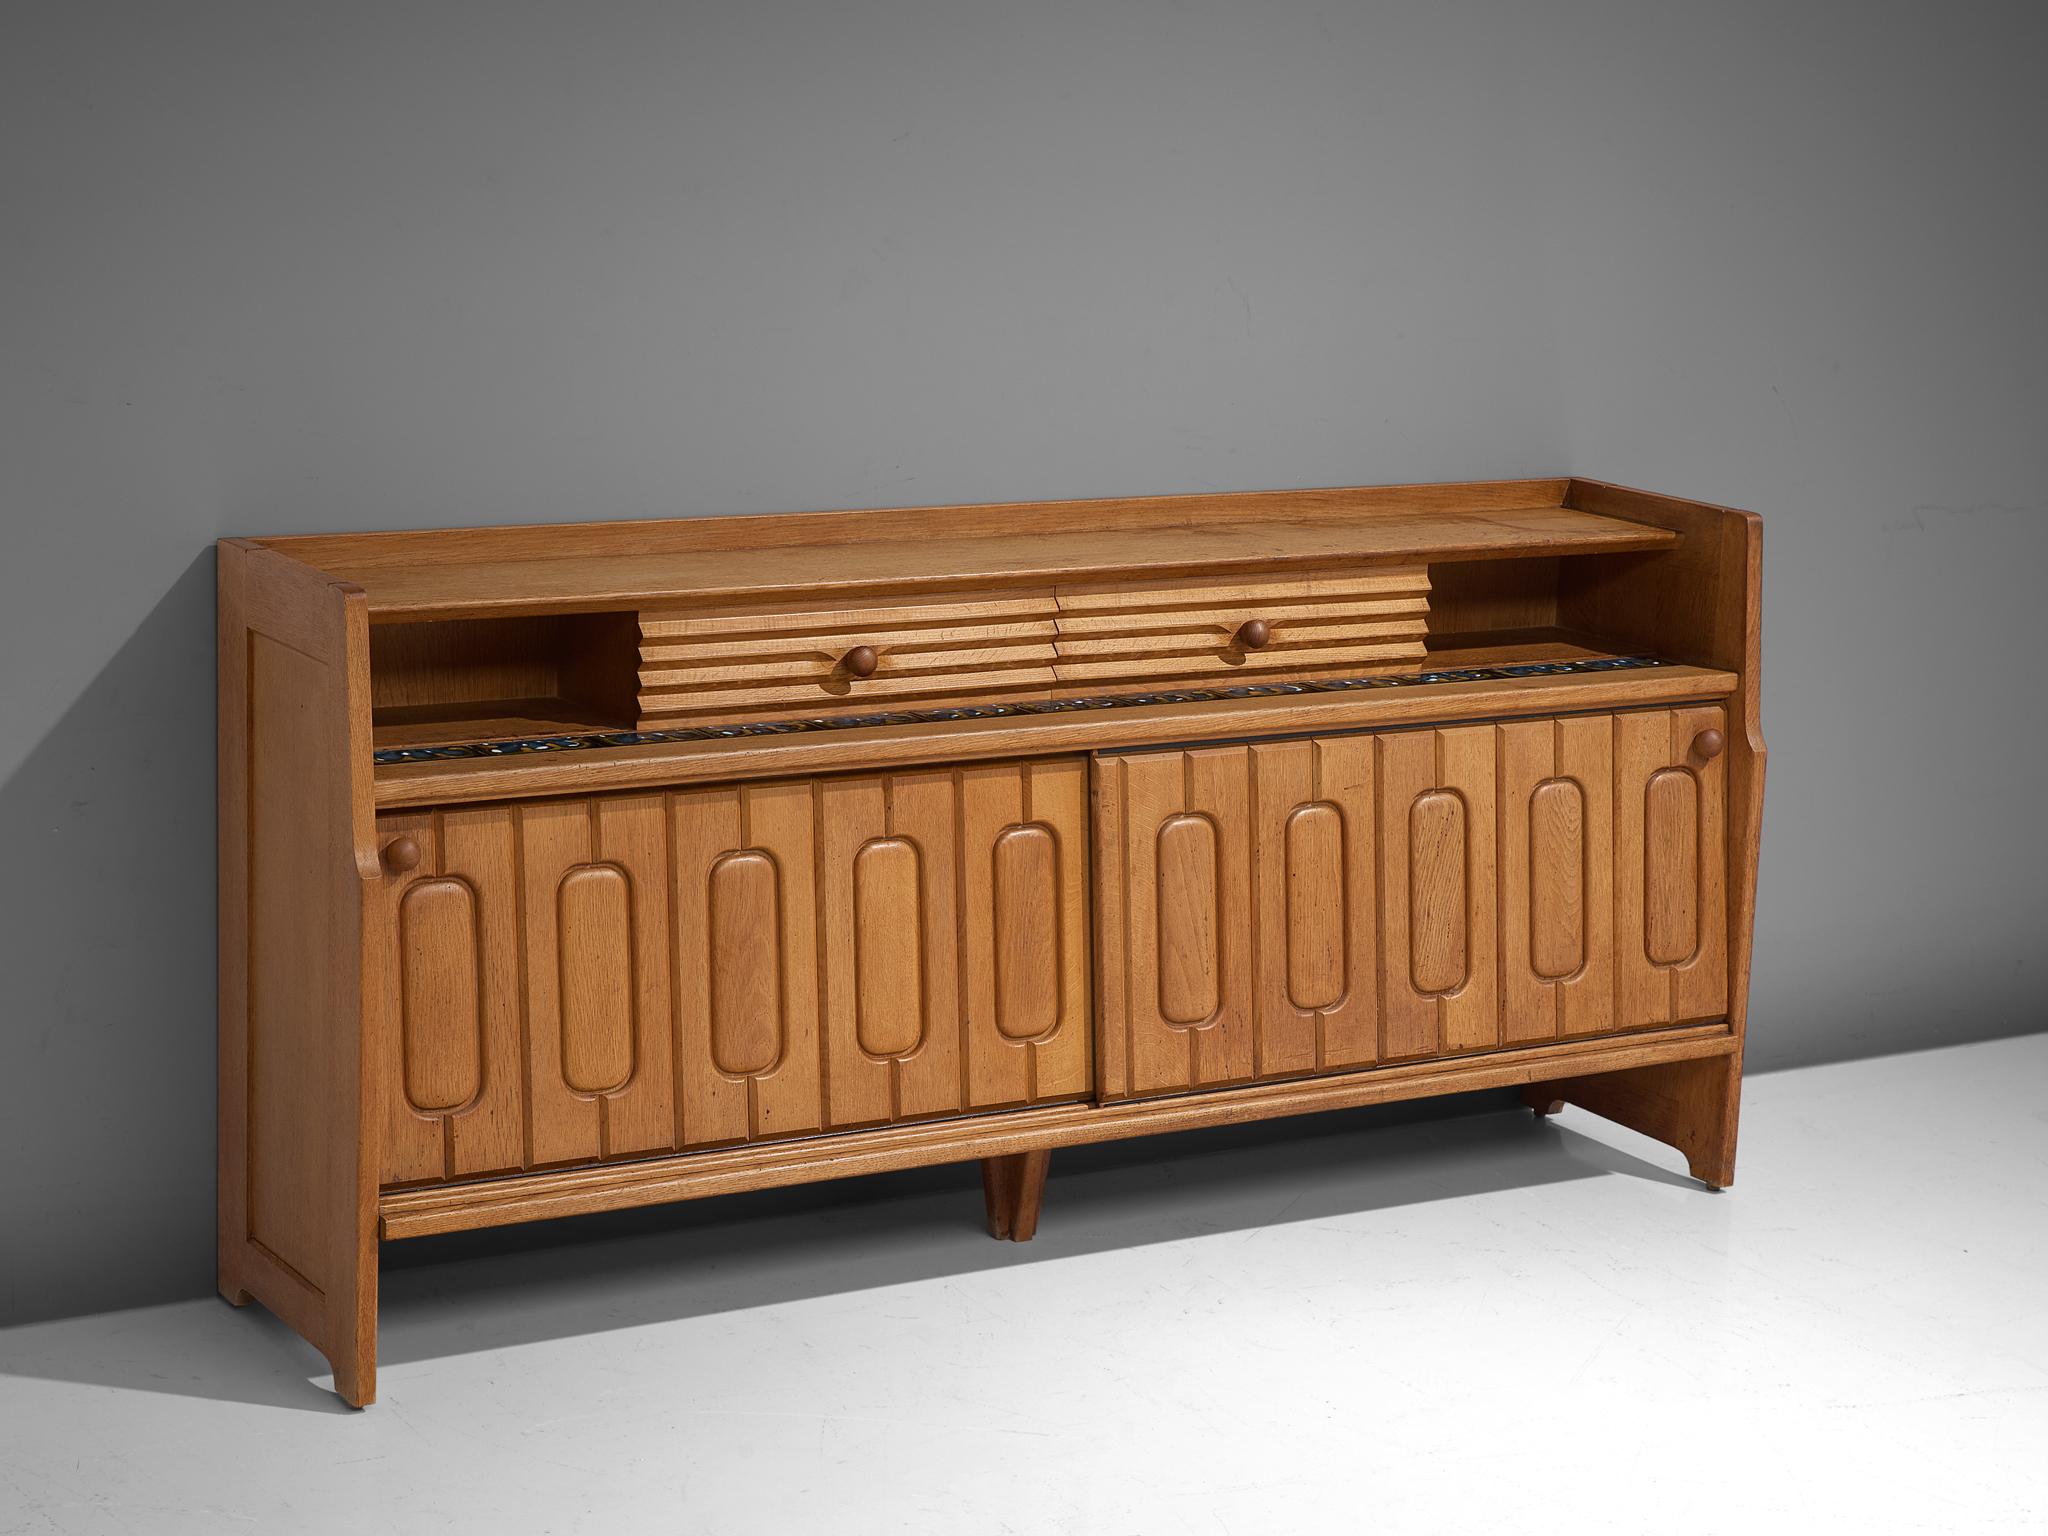 Guillerme et Chambron, sideboard, in oak and ceramic, France, 1960s.

Credenza in oak by French designer due Guillerme & Chambron. This sideboard is equipped with two sliding-doors and a set of drawers. The front of the sideboard is beautifully